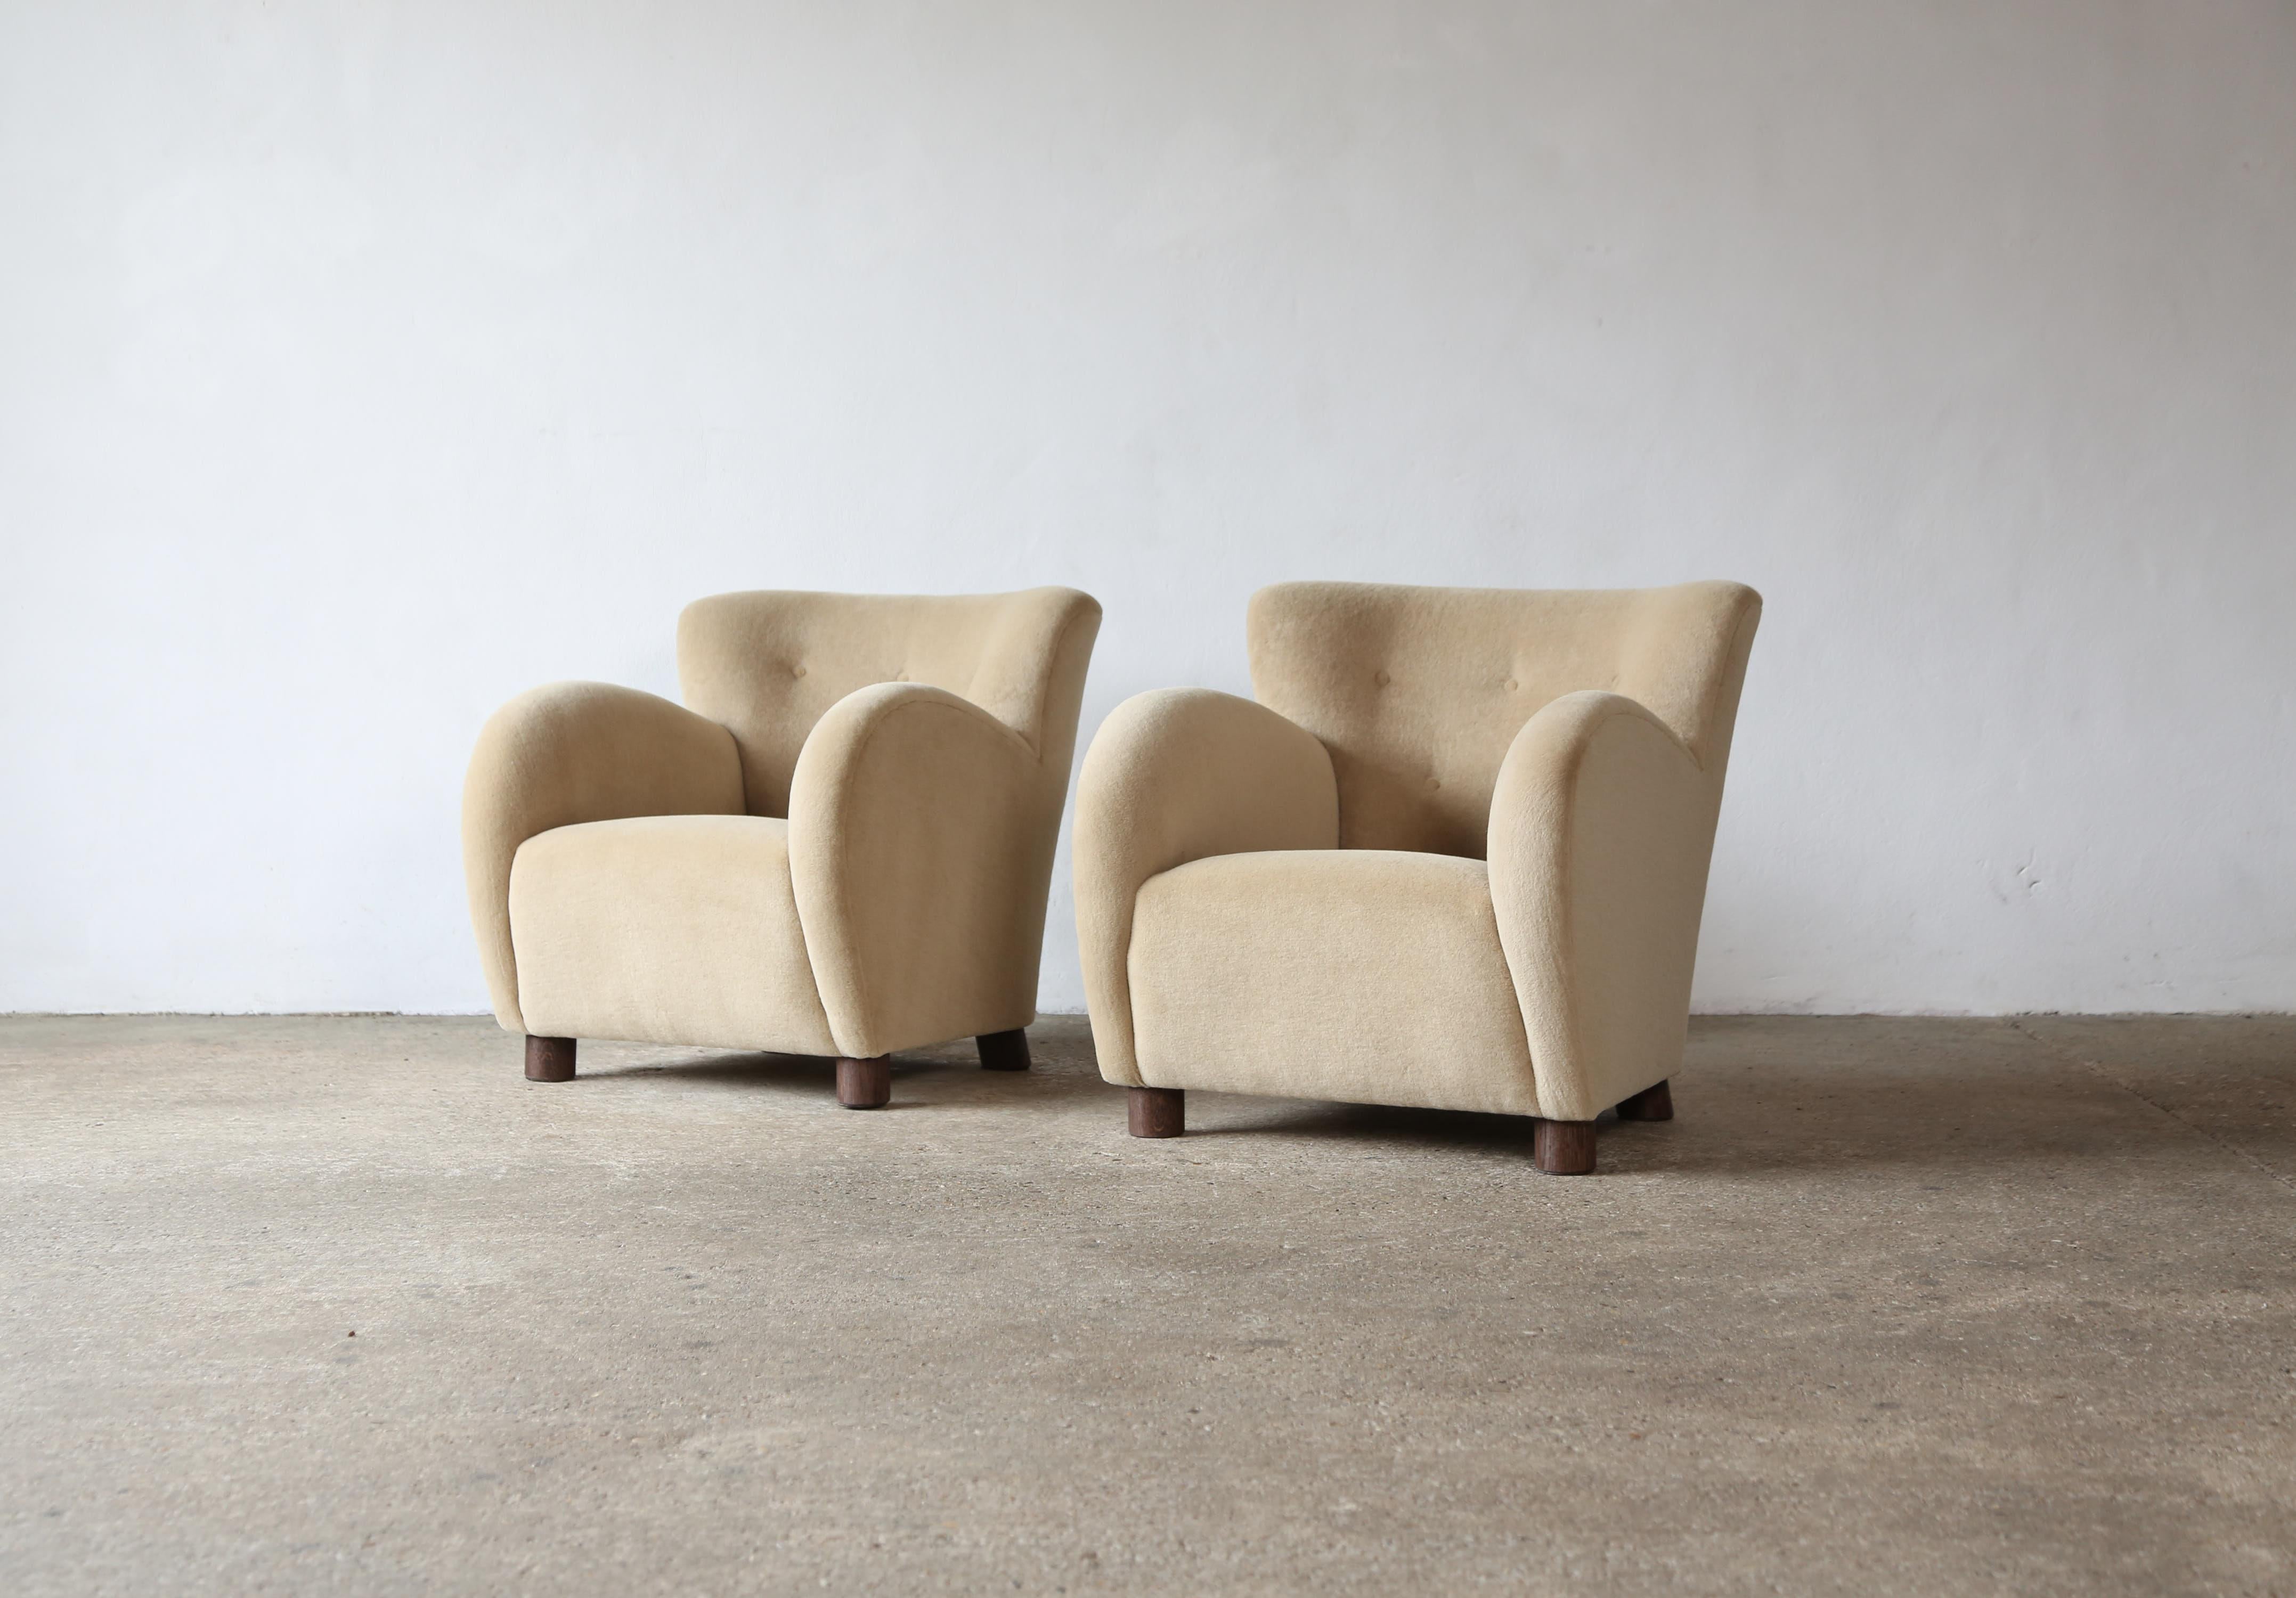 A superb pair of modern round arm armchairs. Handmade beech frames, sprung seat and newly upholstered in a premium, beige / sand, soft, pure alpaca wool fabric with solid oak feet. Fast shipping worldwide.



